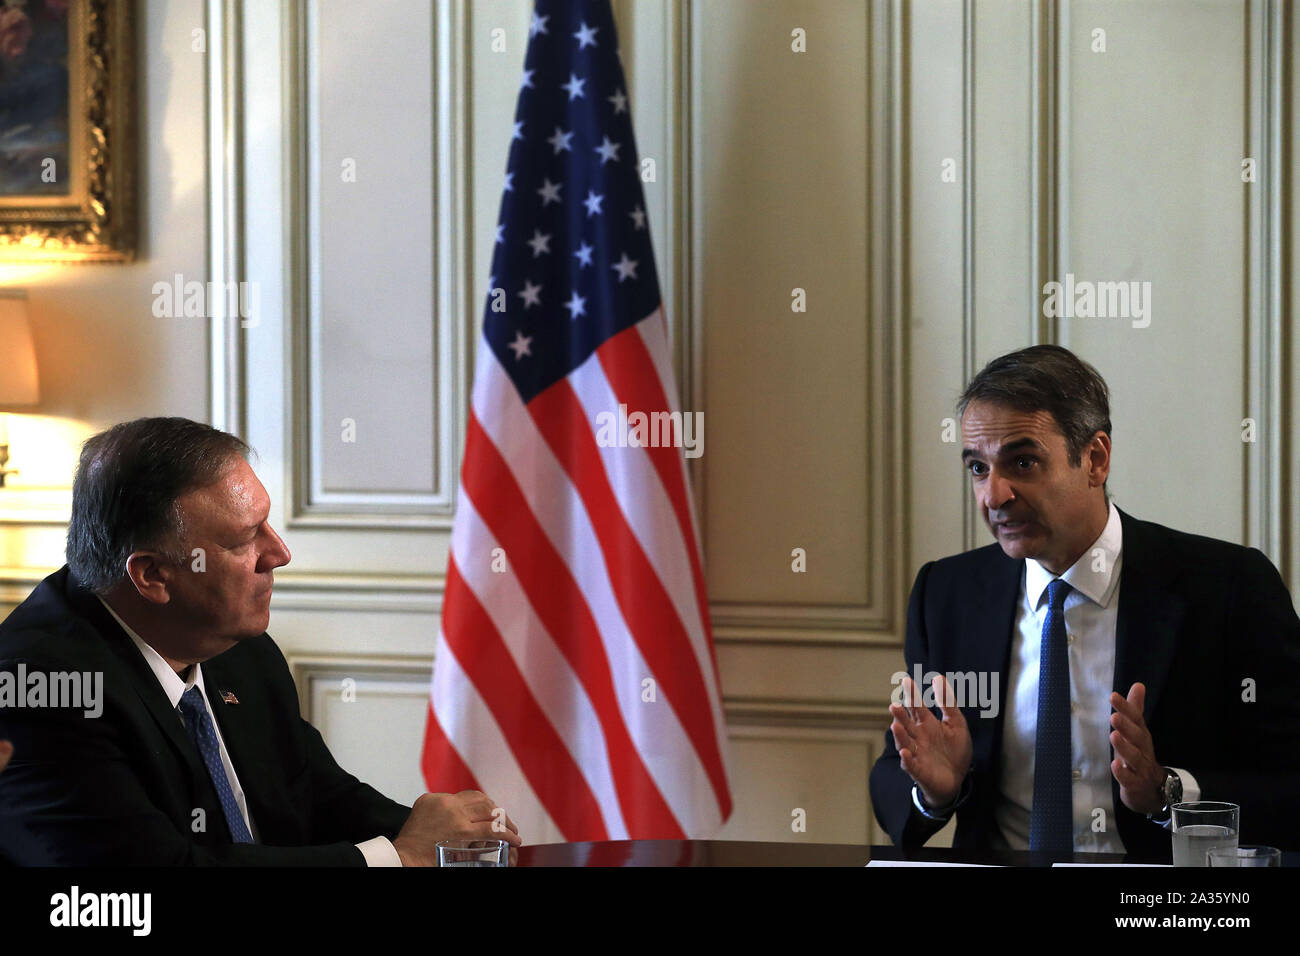 Athens, Greece. 5th Oct, 2019. Greek Prime Minister Kyriakos Mitsotakis (R) meets with U.S. Secretary of State Mike Pompeo in Athens, Greece, on Oct. 5, 2019. Credit: Marios Lolos/Xinhua/Alamy Live News Stock Photo